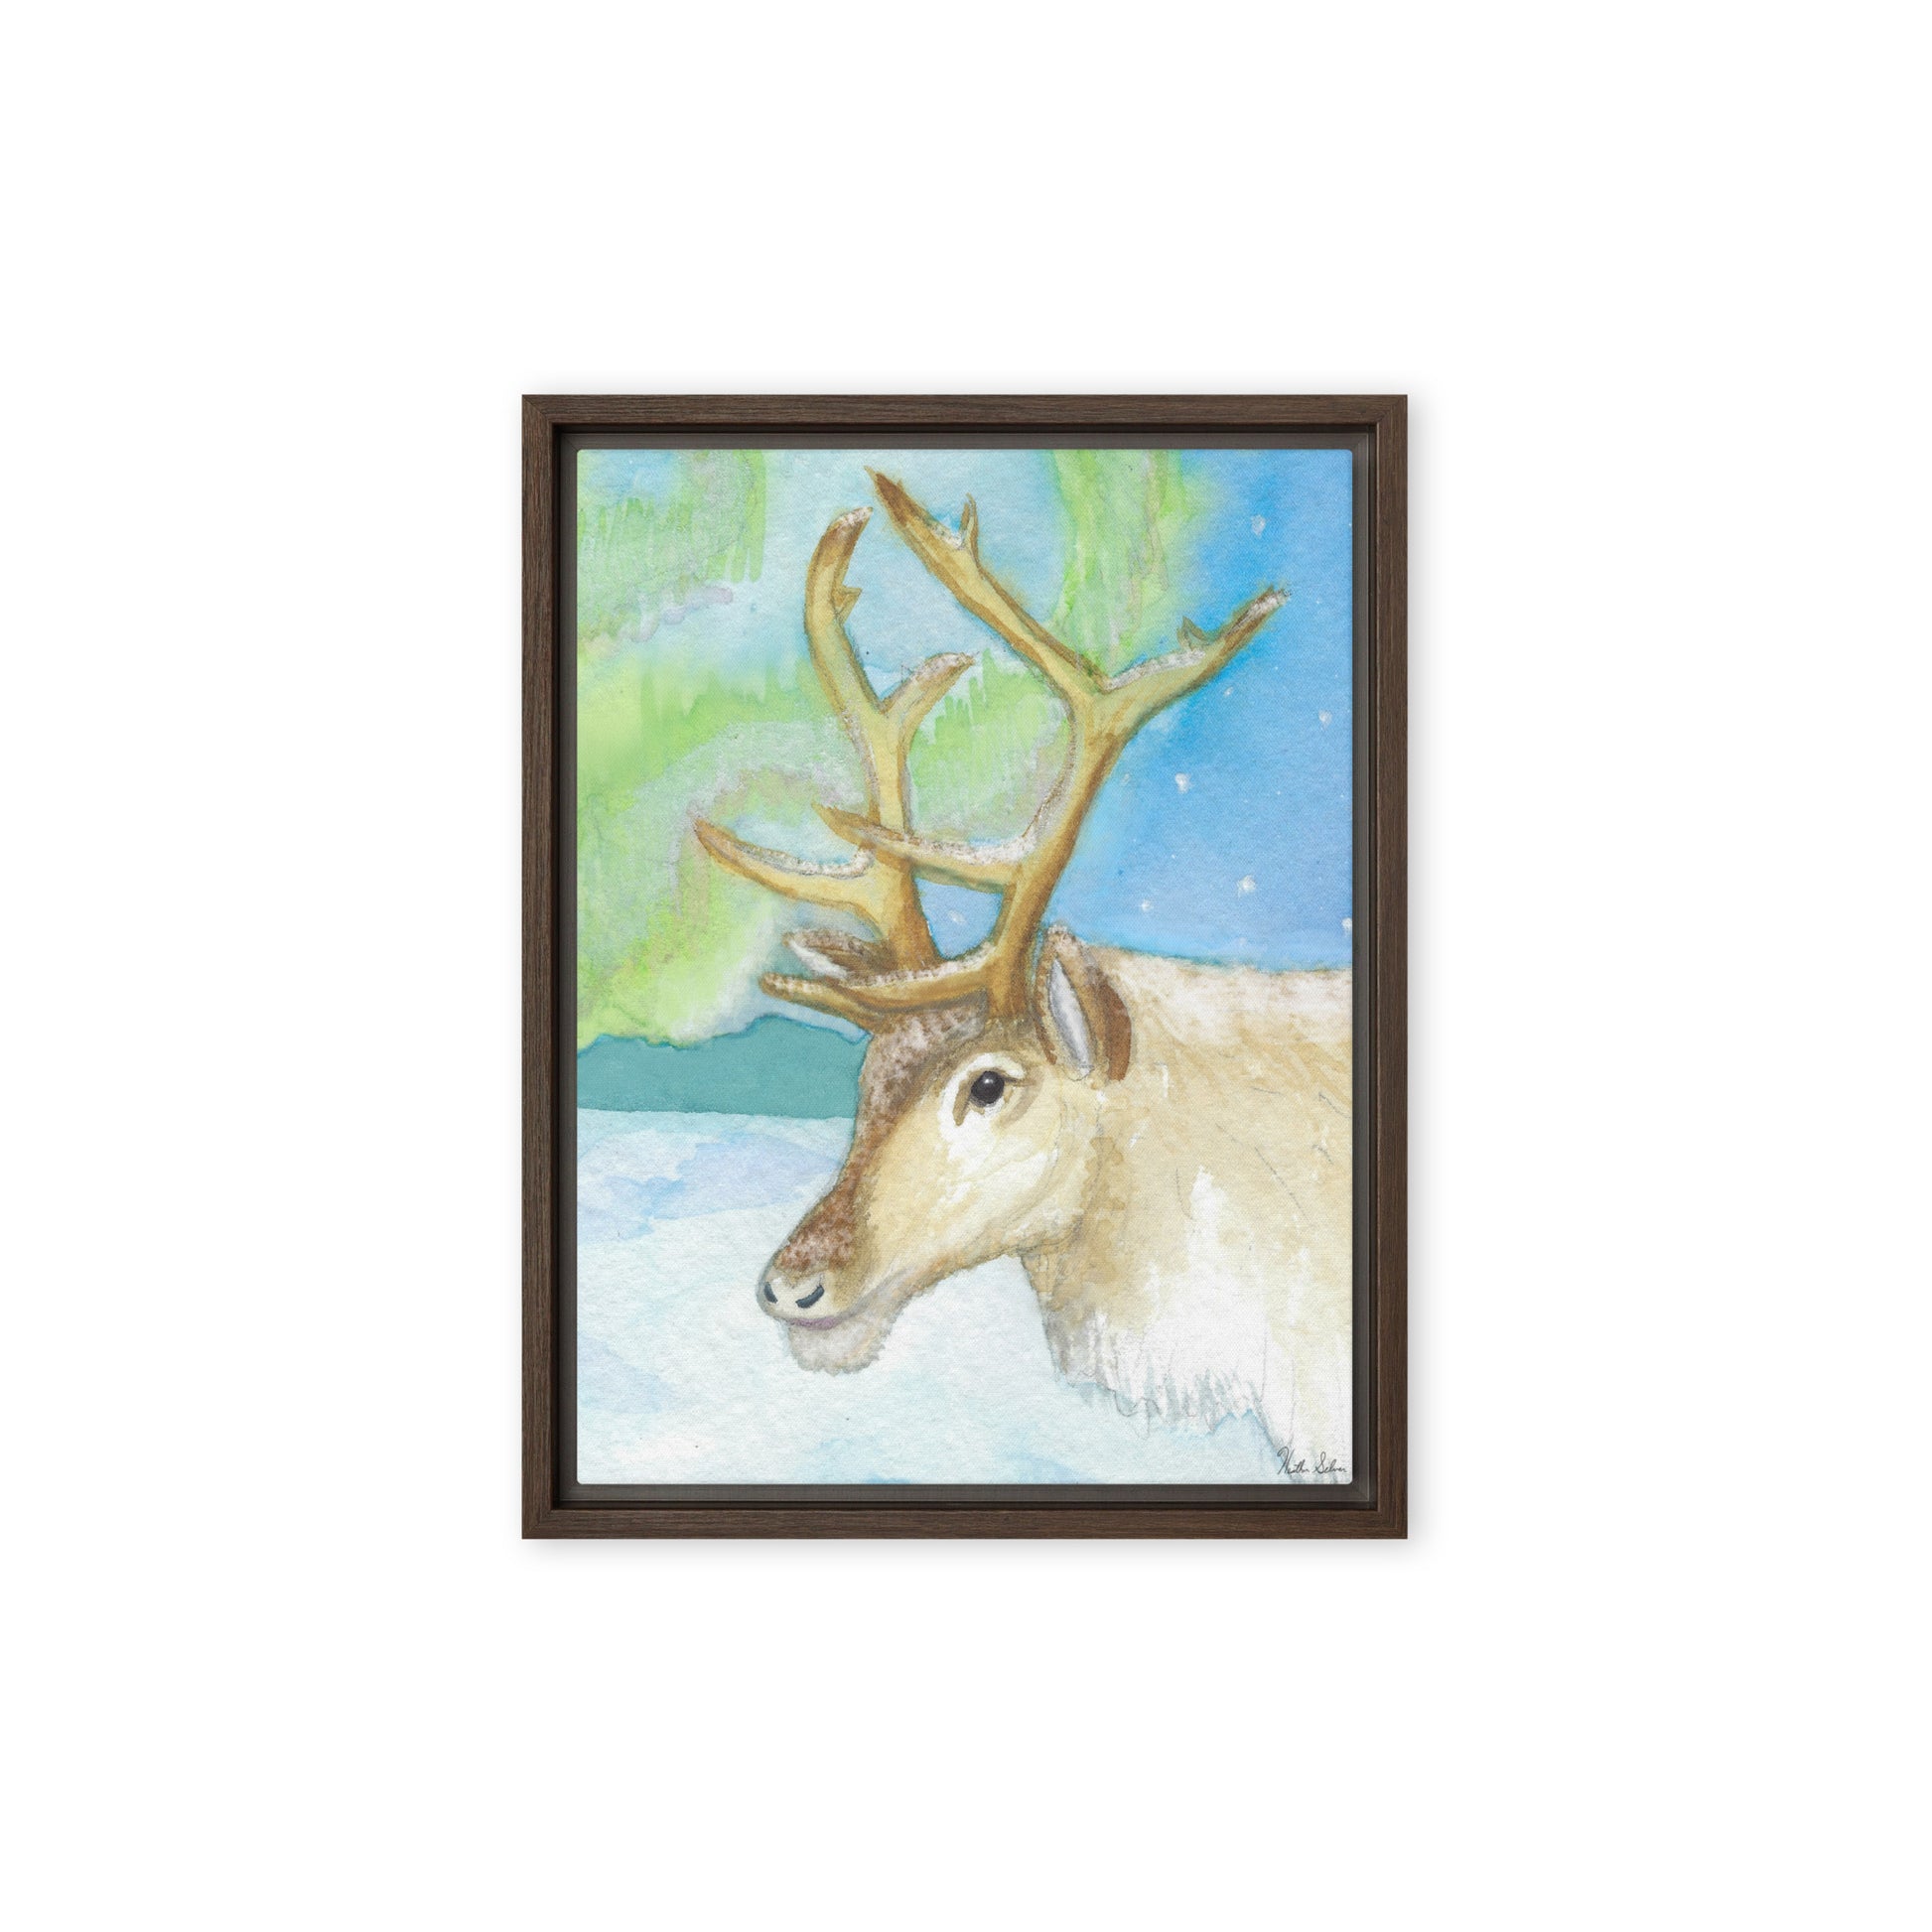 12 by 16 inch framed canvas art print of Heather Silver's Northern Lights Reindeer.  Canvas print mounted in a brown pine frame. Hanging hardware included.